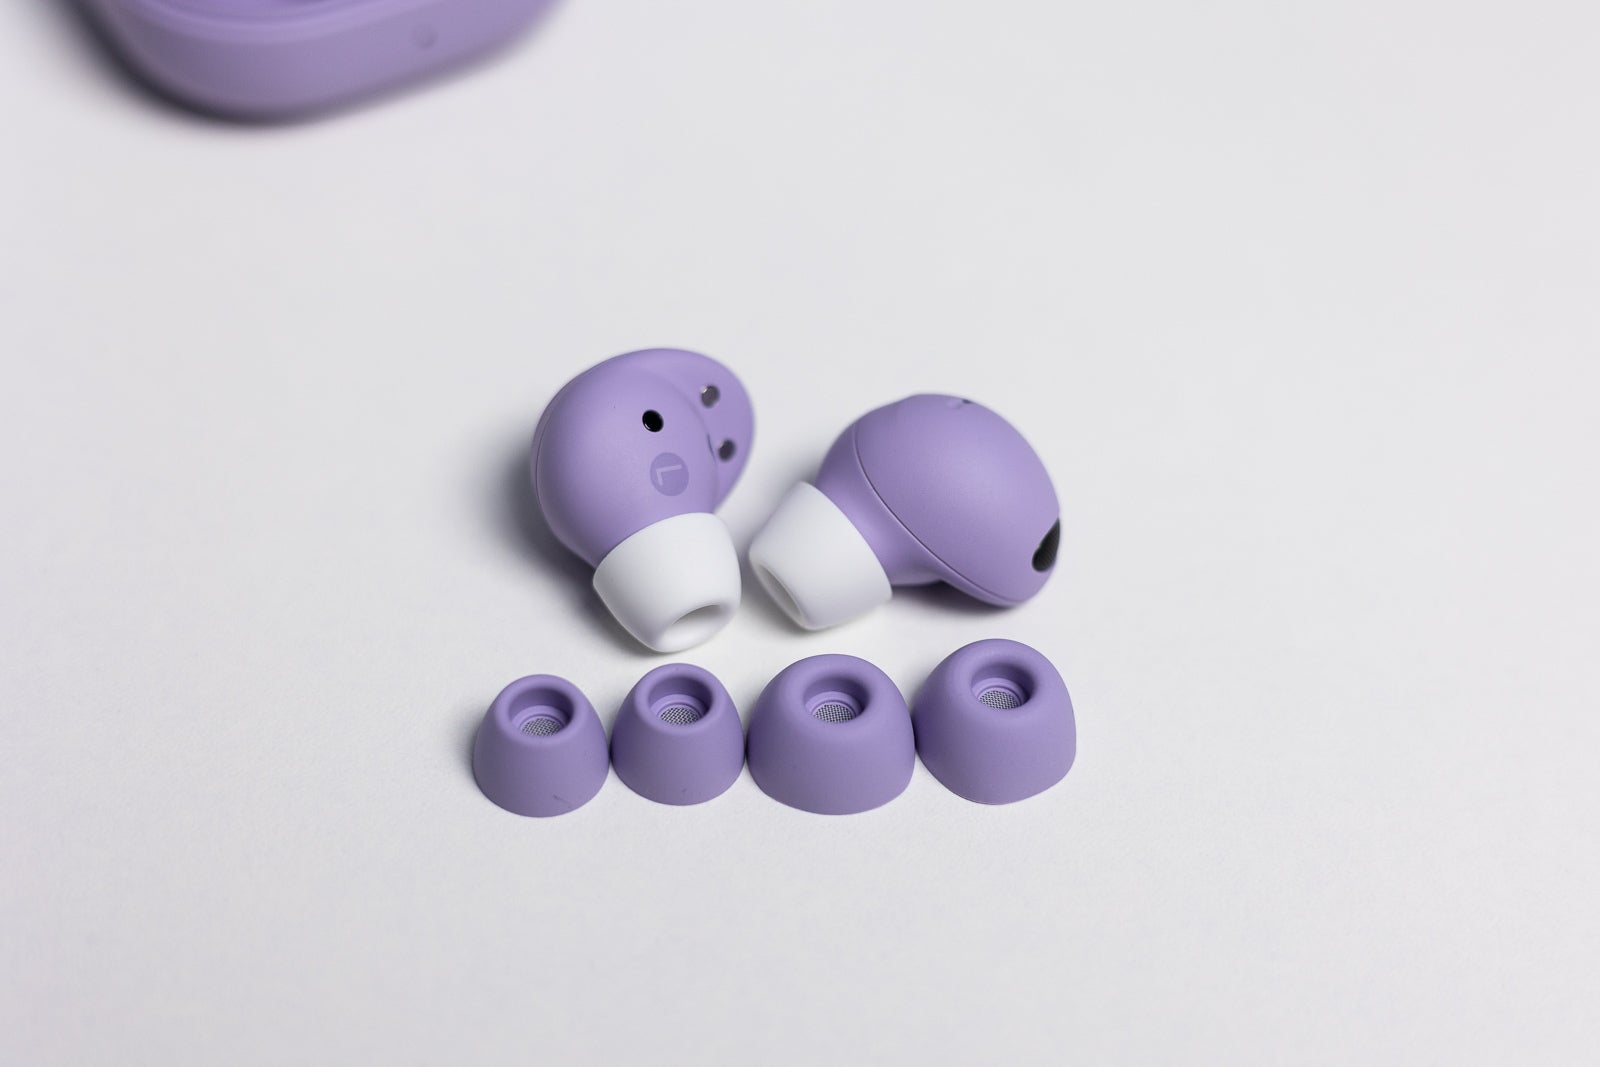 (Image credit - PhoneArena) Galaxy Buds 2 Pro earbuds and included eartips - Galaxy Buds 2 Pro review: Sleeker design, but is it worth the price jump?